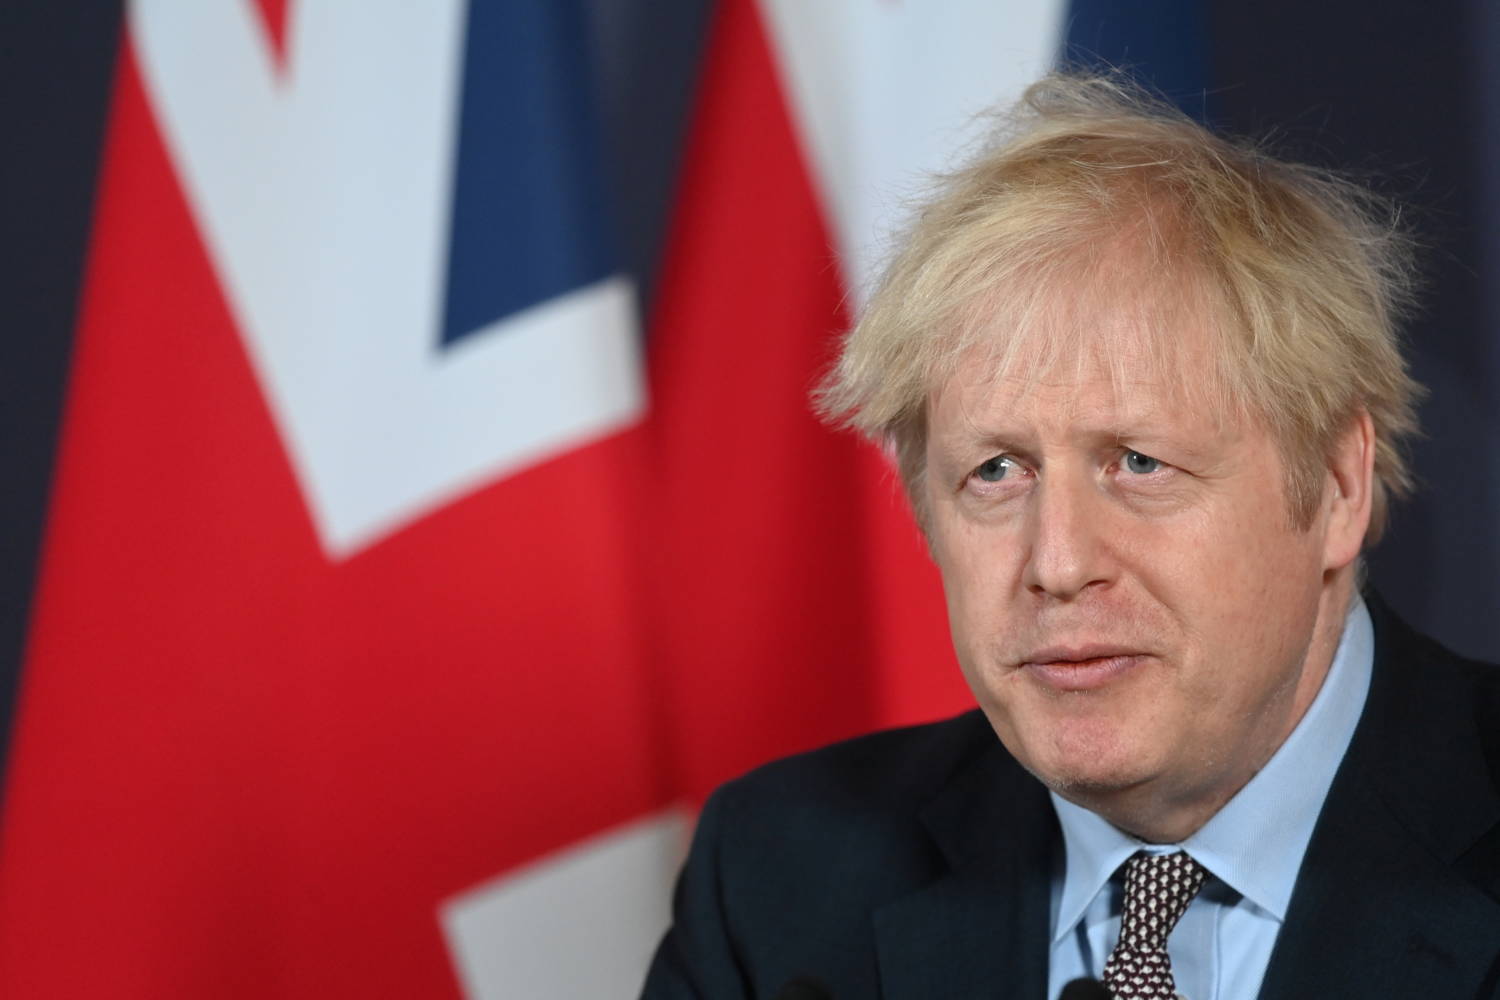 uk-needs-to-do-more-to-tackle-racism-pm-johnson-says-in-cyprus